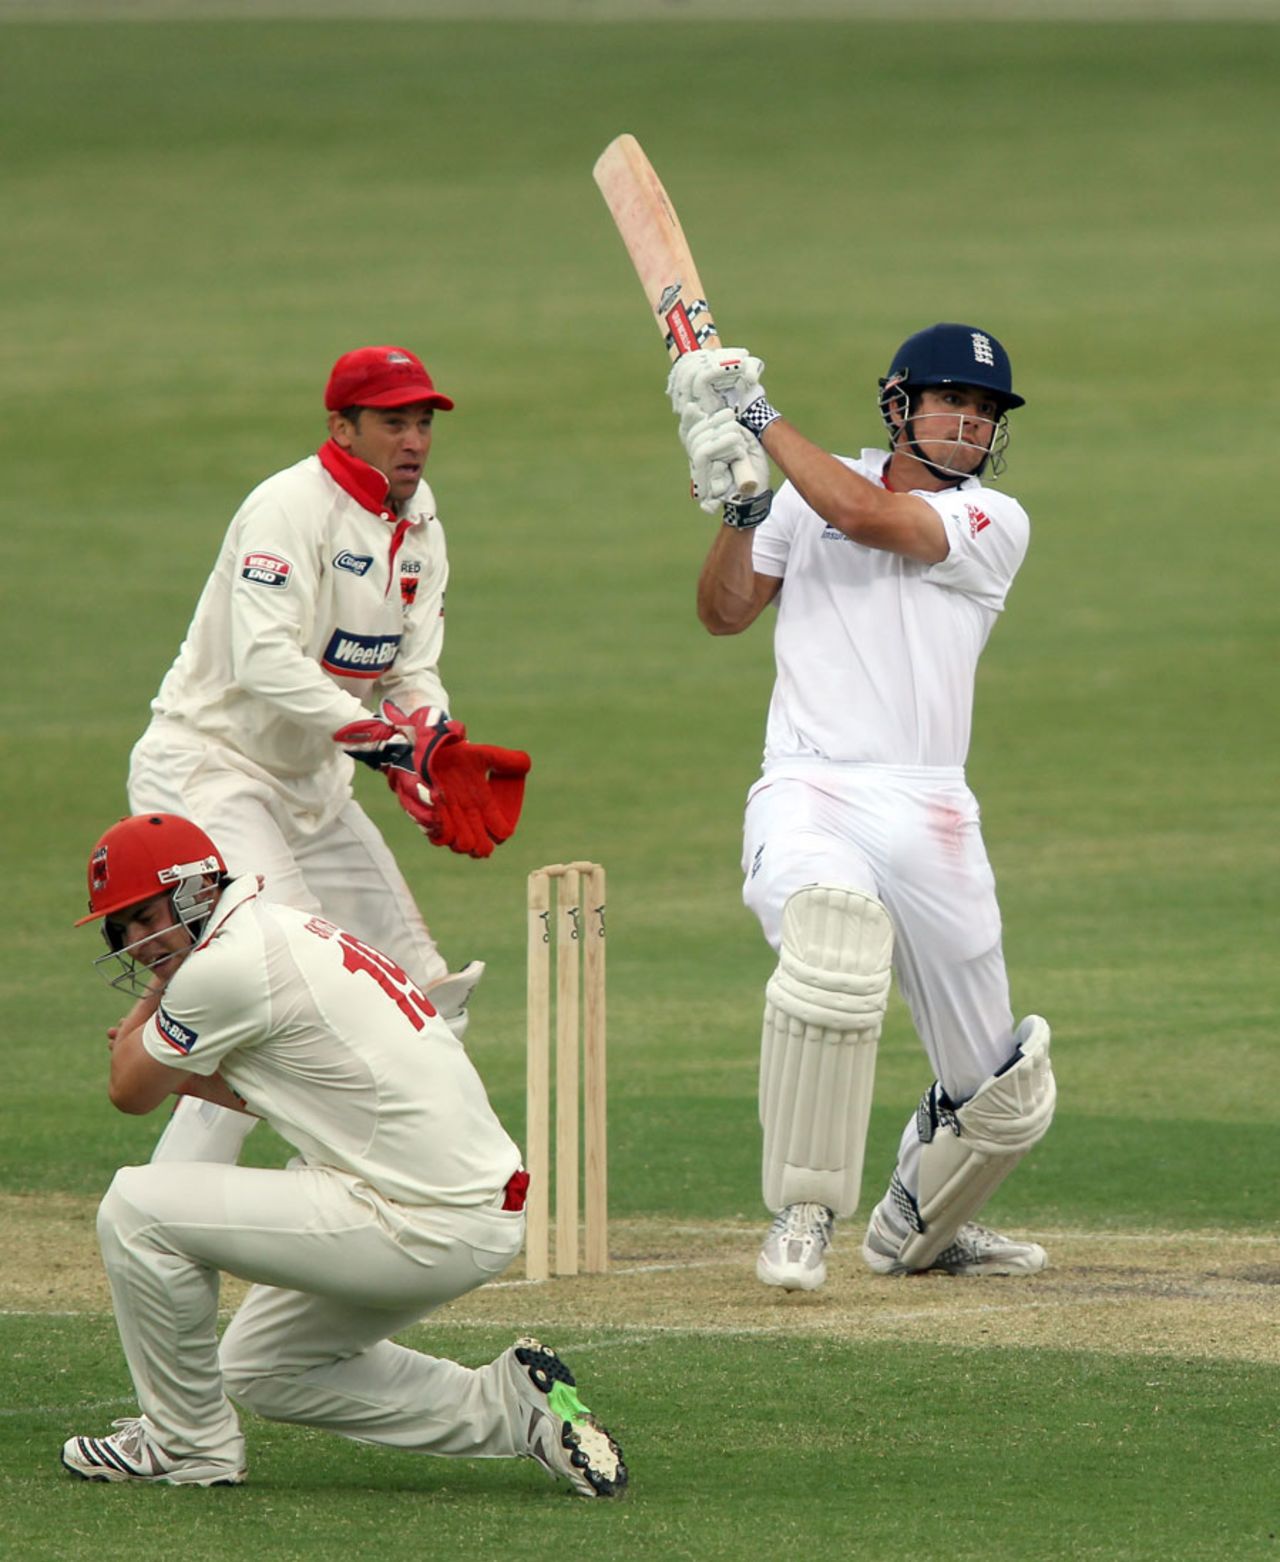 Alastair Cook spent some valuable time at the crease as he reached the close unbeaten on 37, South Australia v England XI, Adelaide, 2nd day, November 12, 2010